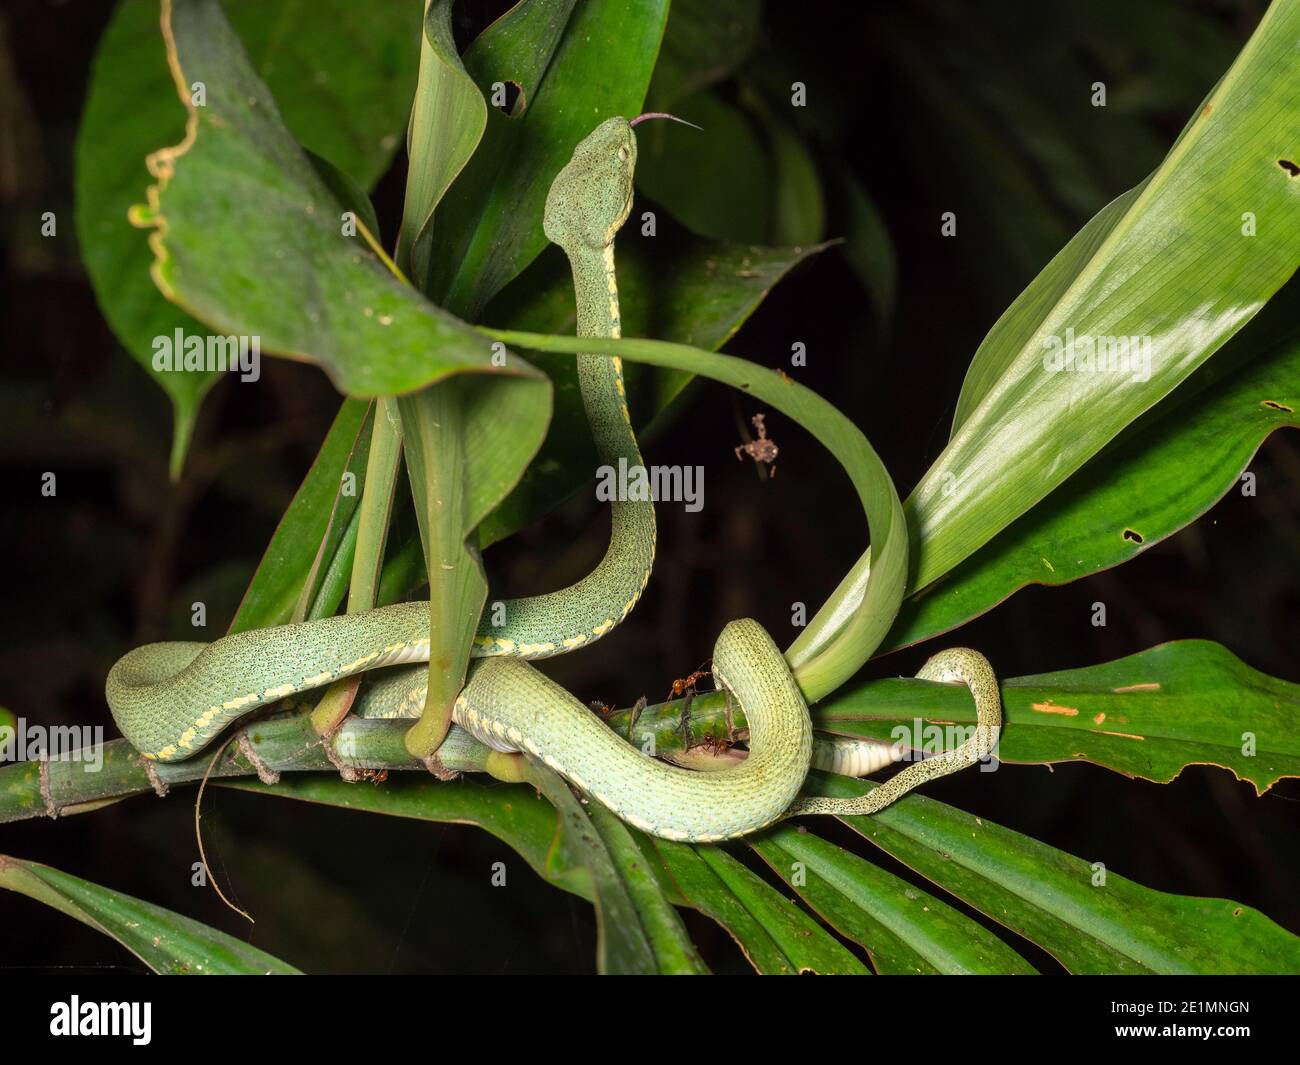 The venomous Two-striped forest pitviper (Bothriopsis bilineata) active at night in the rainforest understory, Ecuador Stock Photo